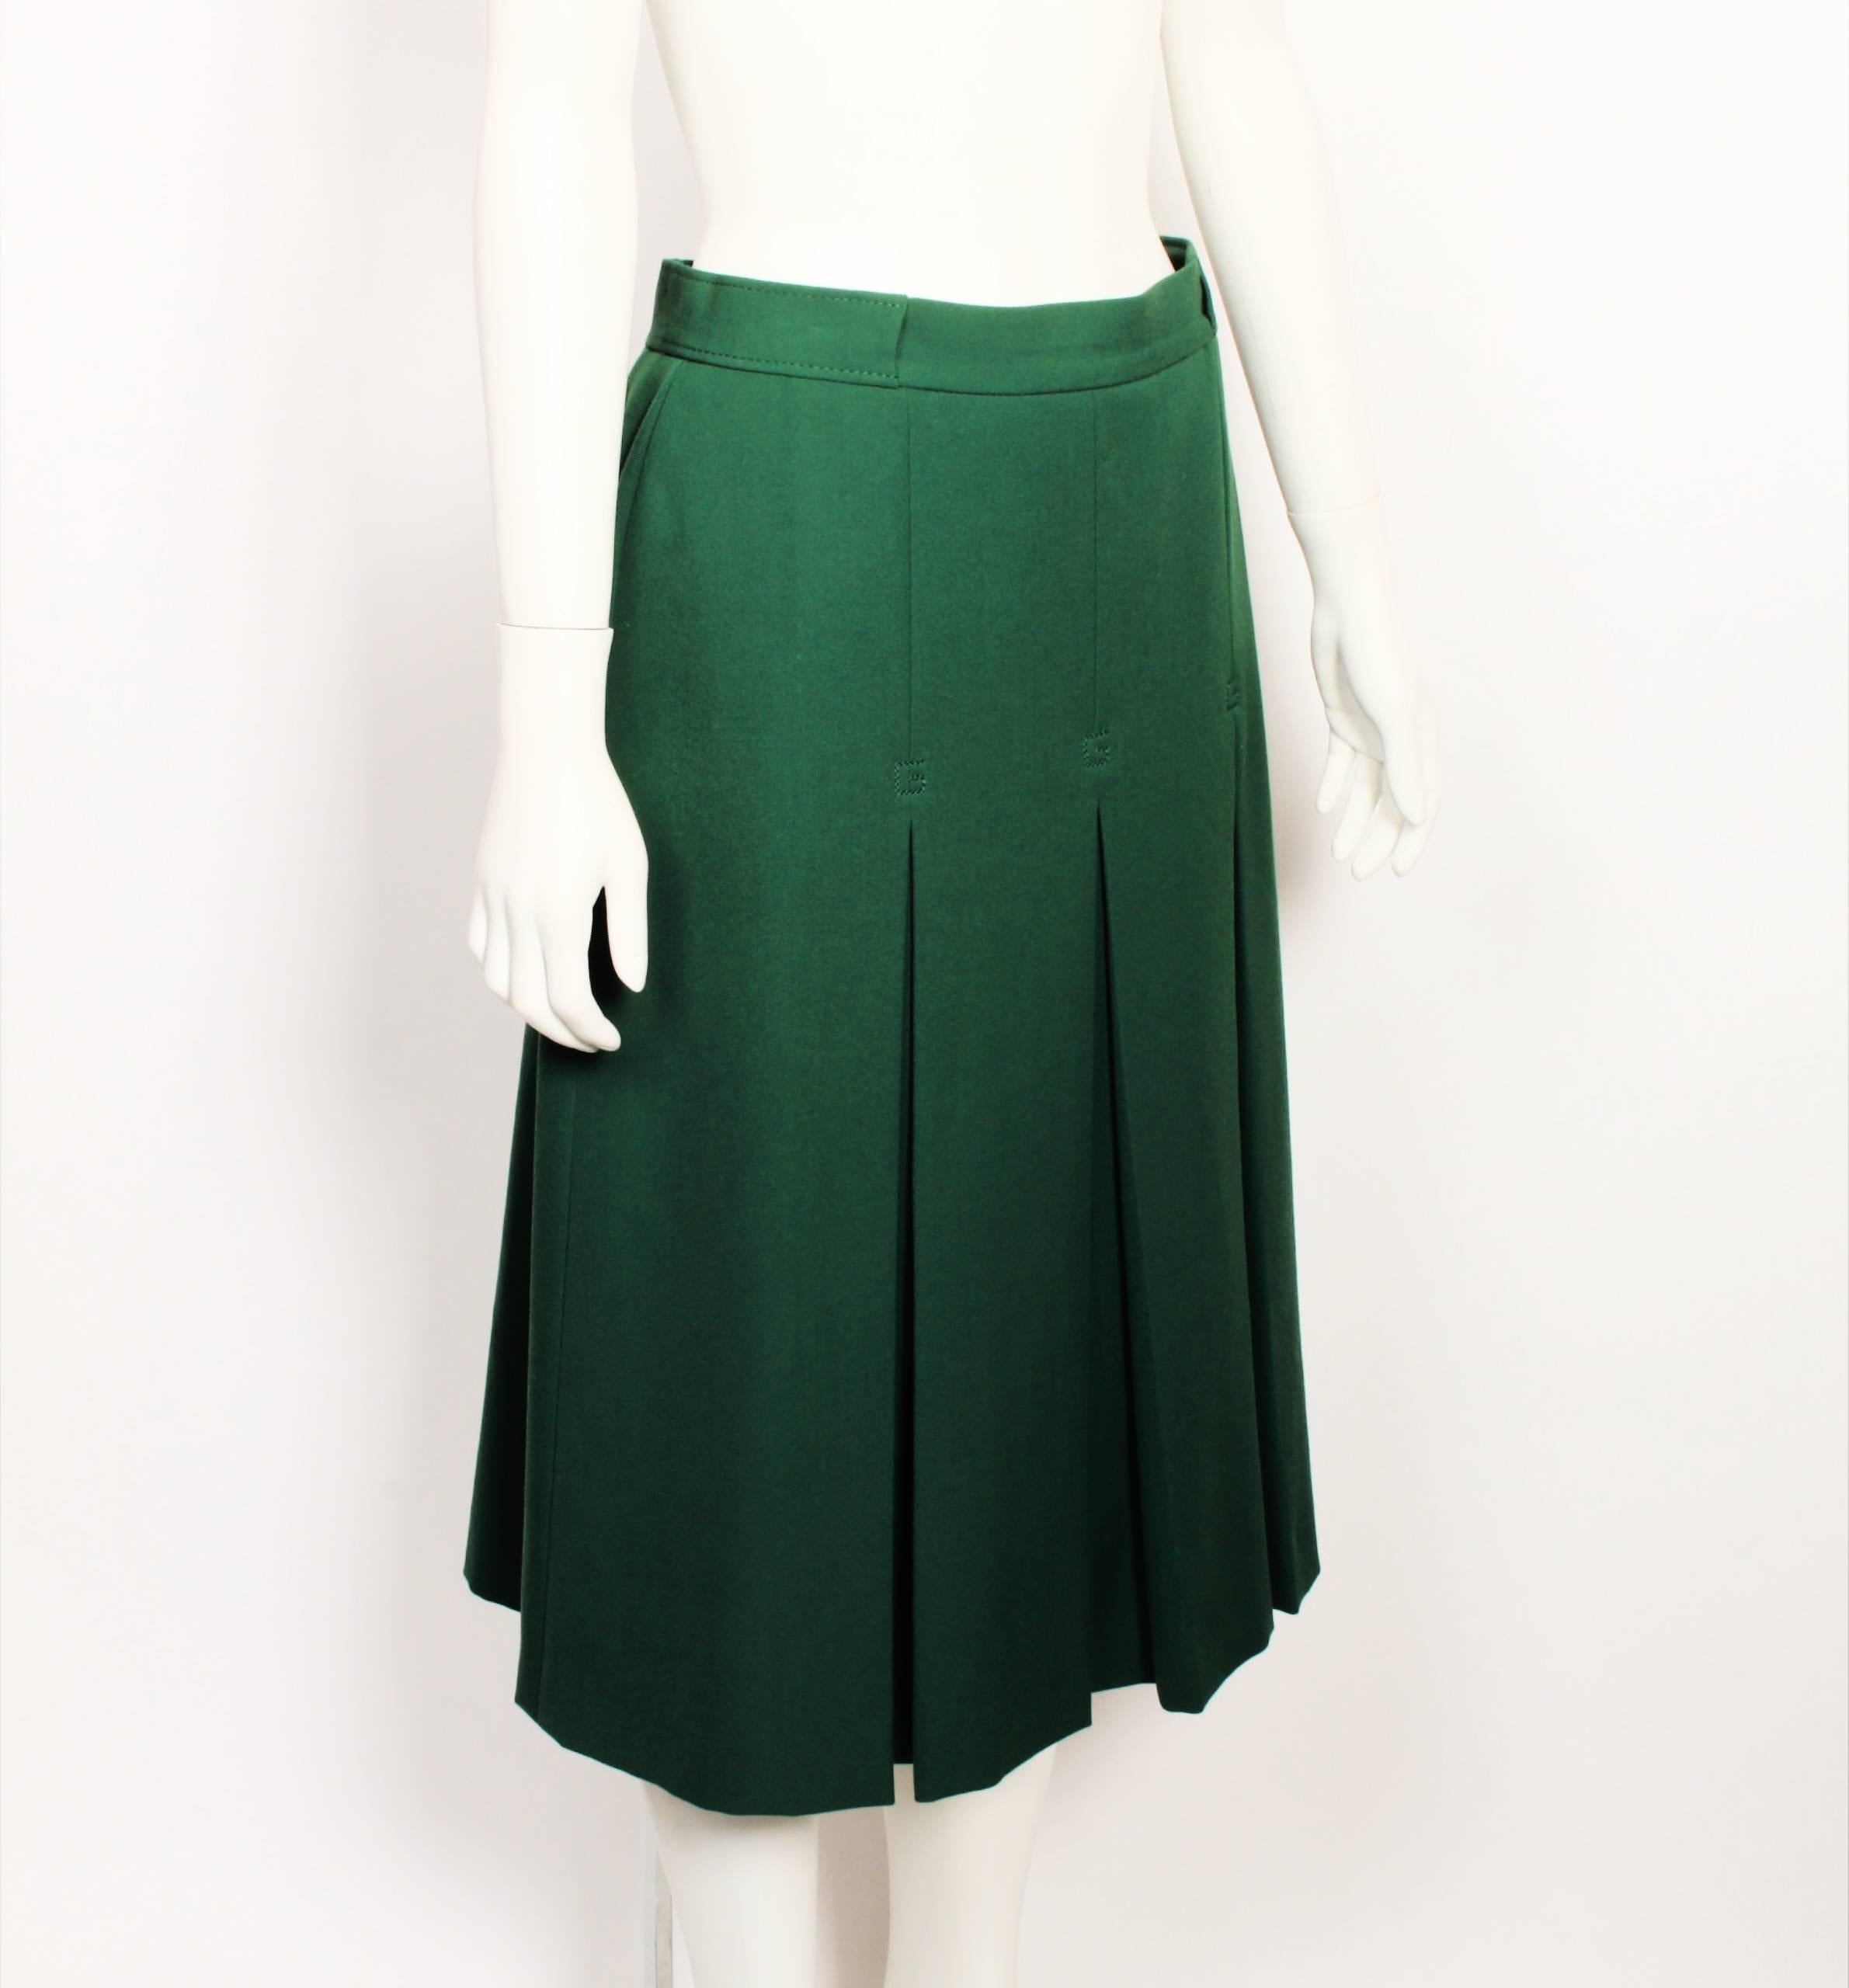 1970's Gucci moss green wool twill mid length skirt features 3 inverted front pleats from the hip point. 
The top of each pleat is decorated with a double stitched G. The fitted waistband has a channel on the sides for a belt or scarf. Fully lined